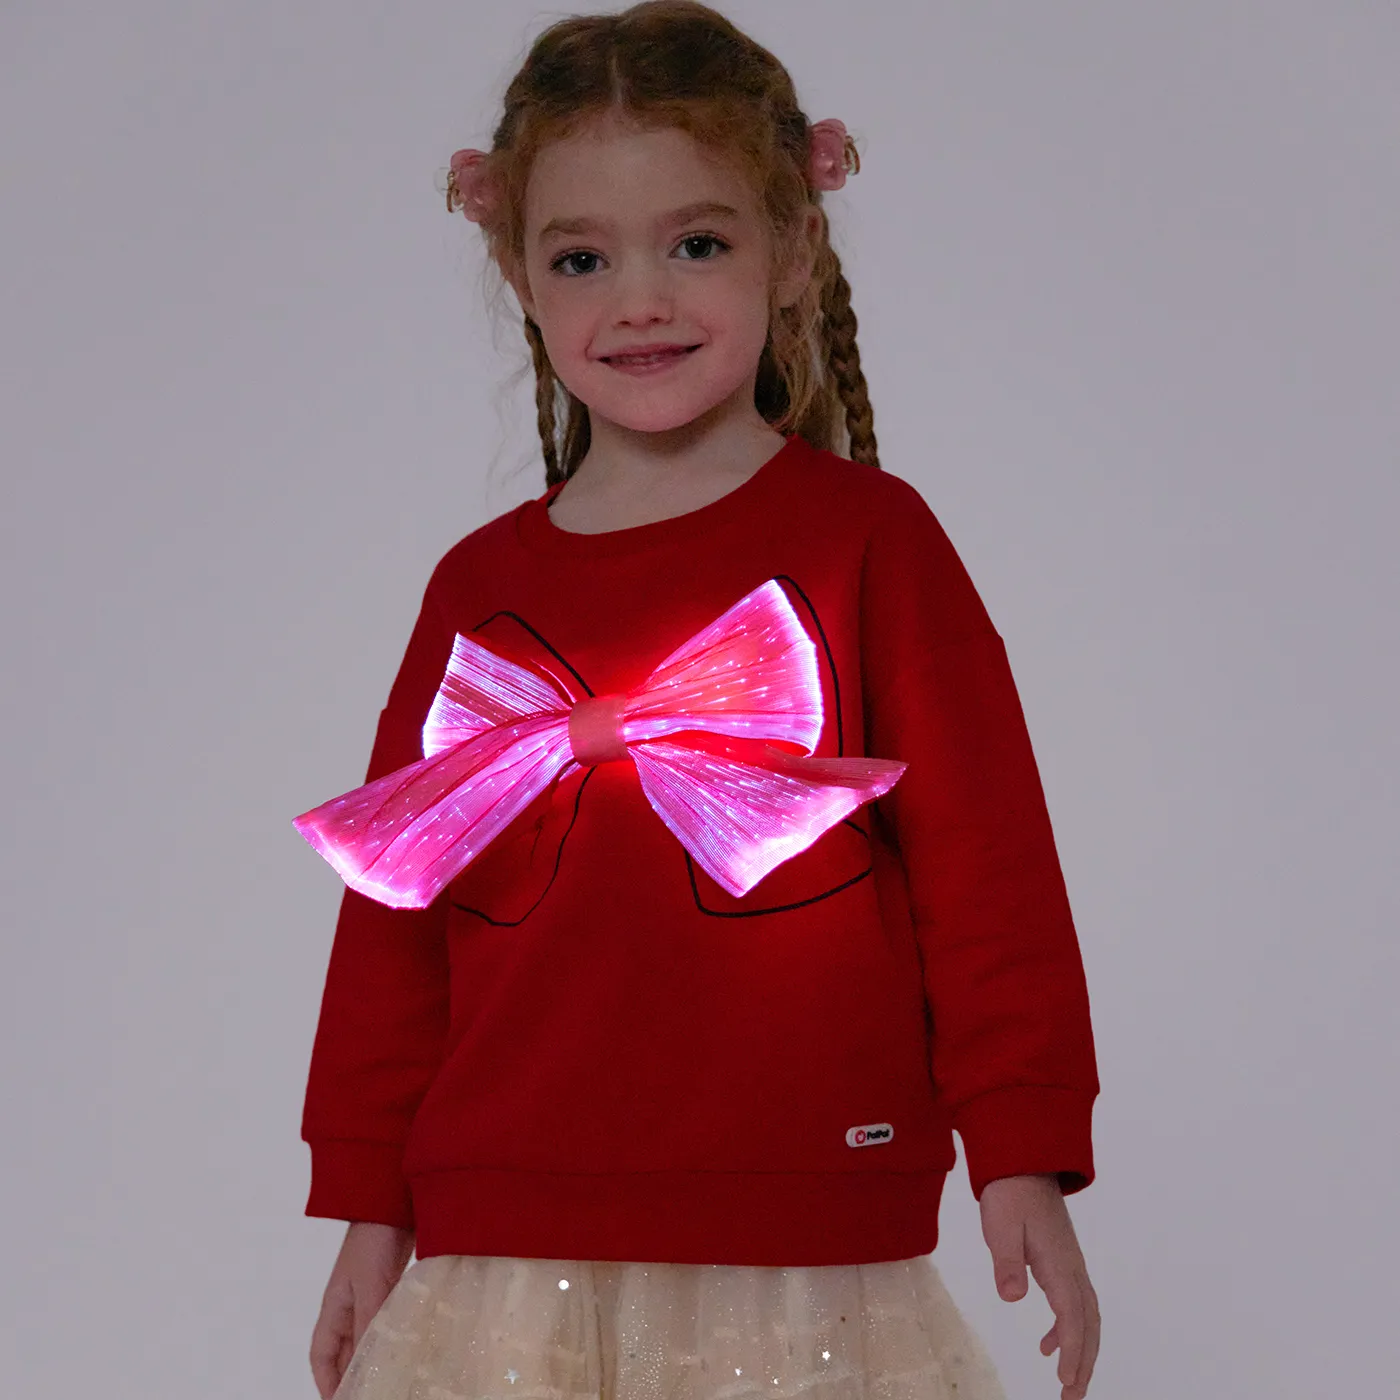 Go-Glow Illuminating Sweatshirt With Light Up Removable Bow Including Controller (Built-In Battery)